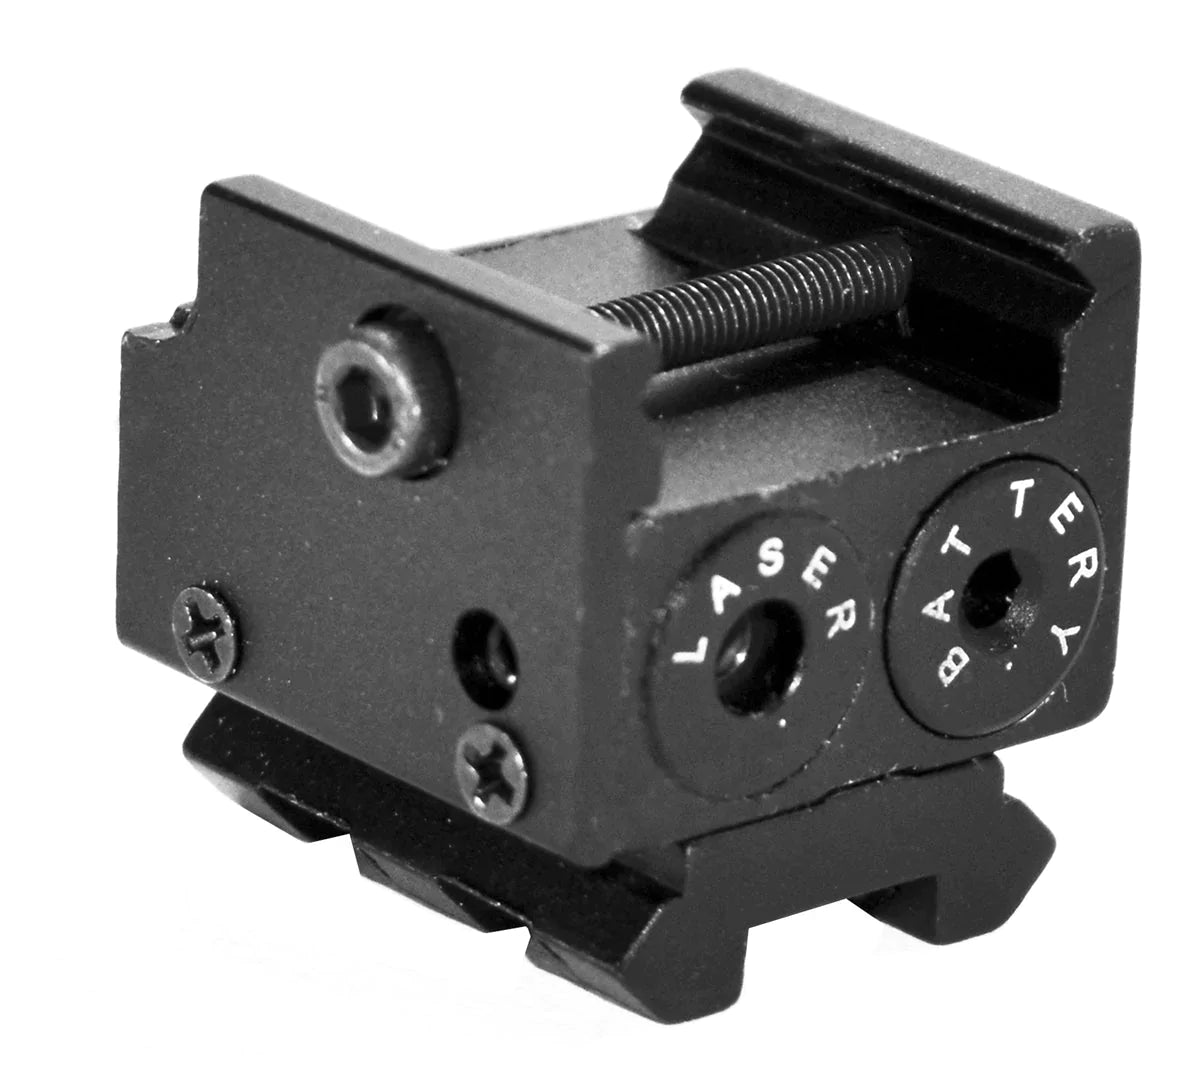 Trinity red dot Sight for Walther Handguns with picatinny rail Tactical Optics Home Defense Accessory Picatinny Weaver Mount Adapter Aluminum Black. - TRINITY SUPPLY INC